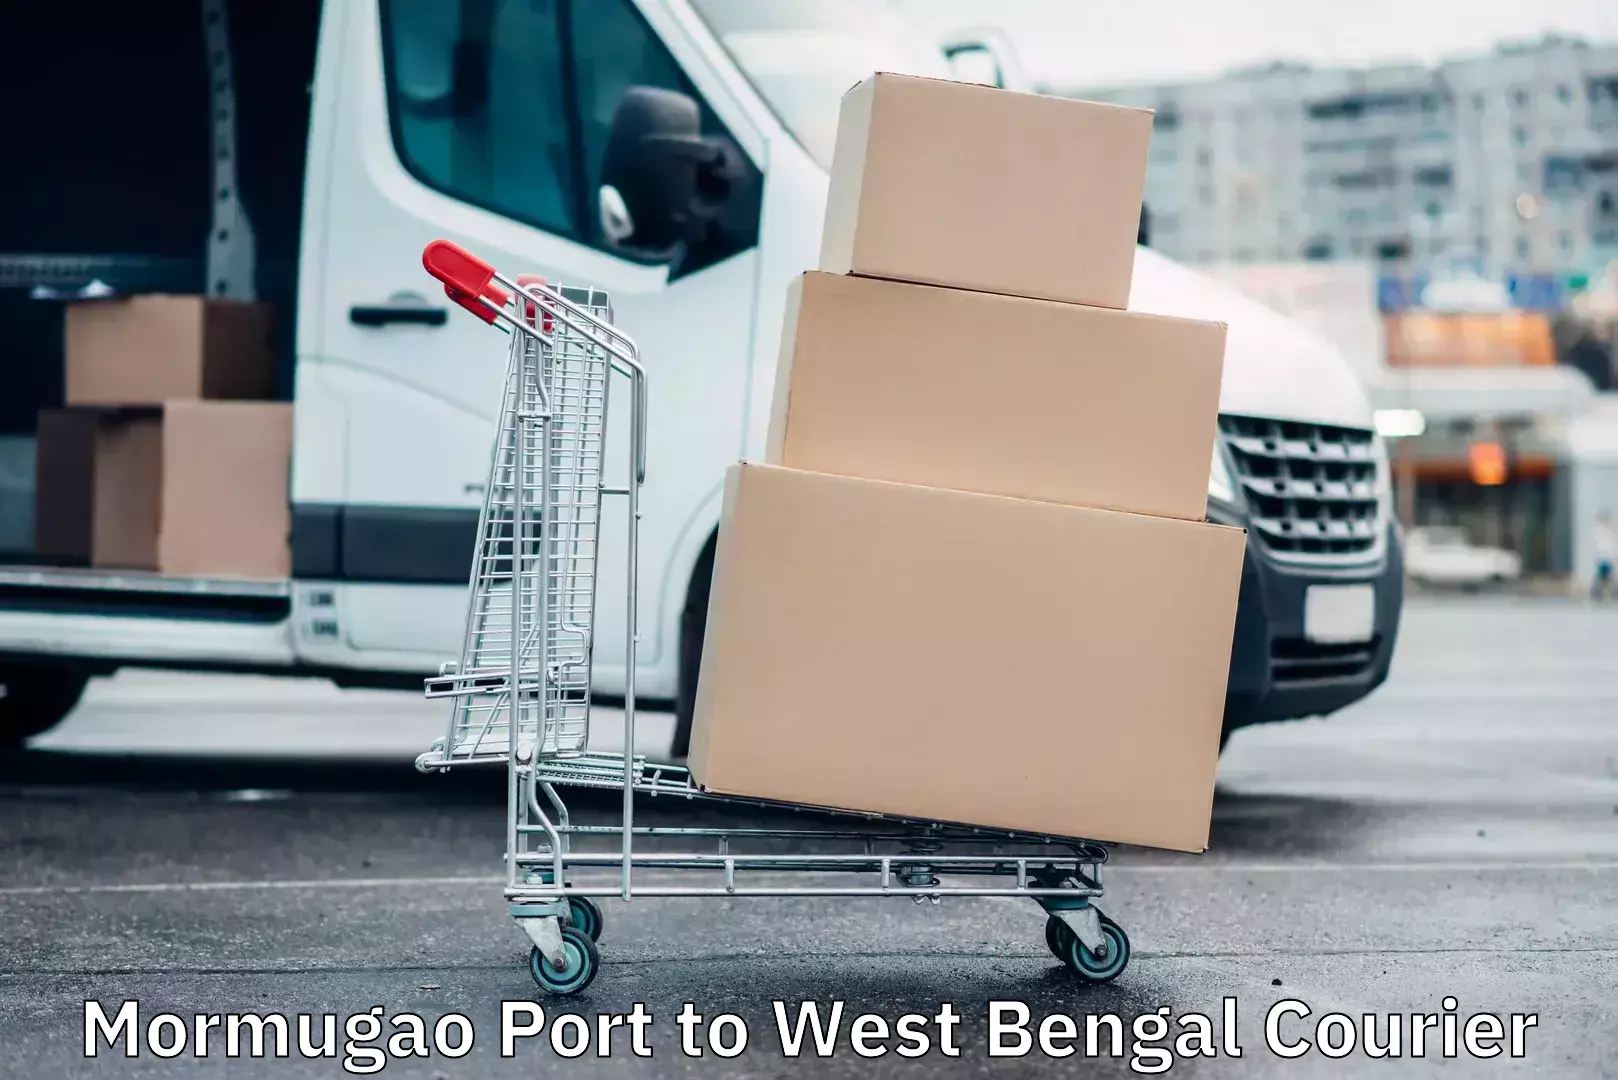 Personal courier services in Mormugao Port to West Bengal